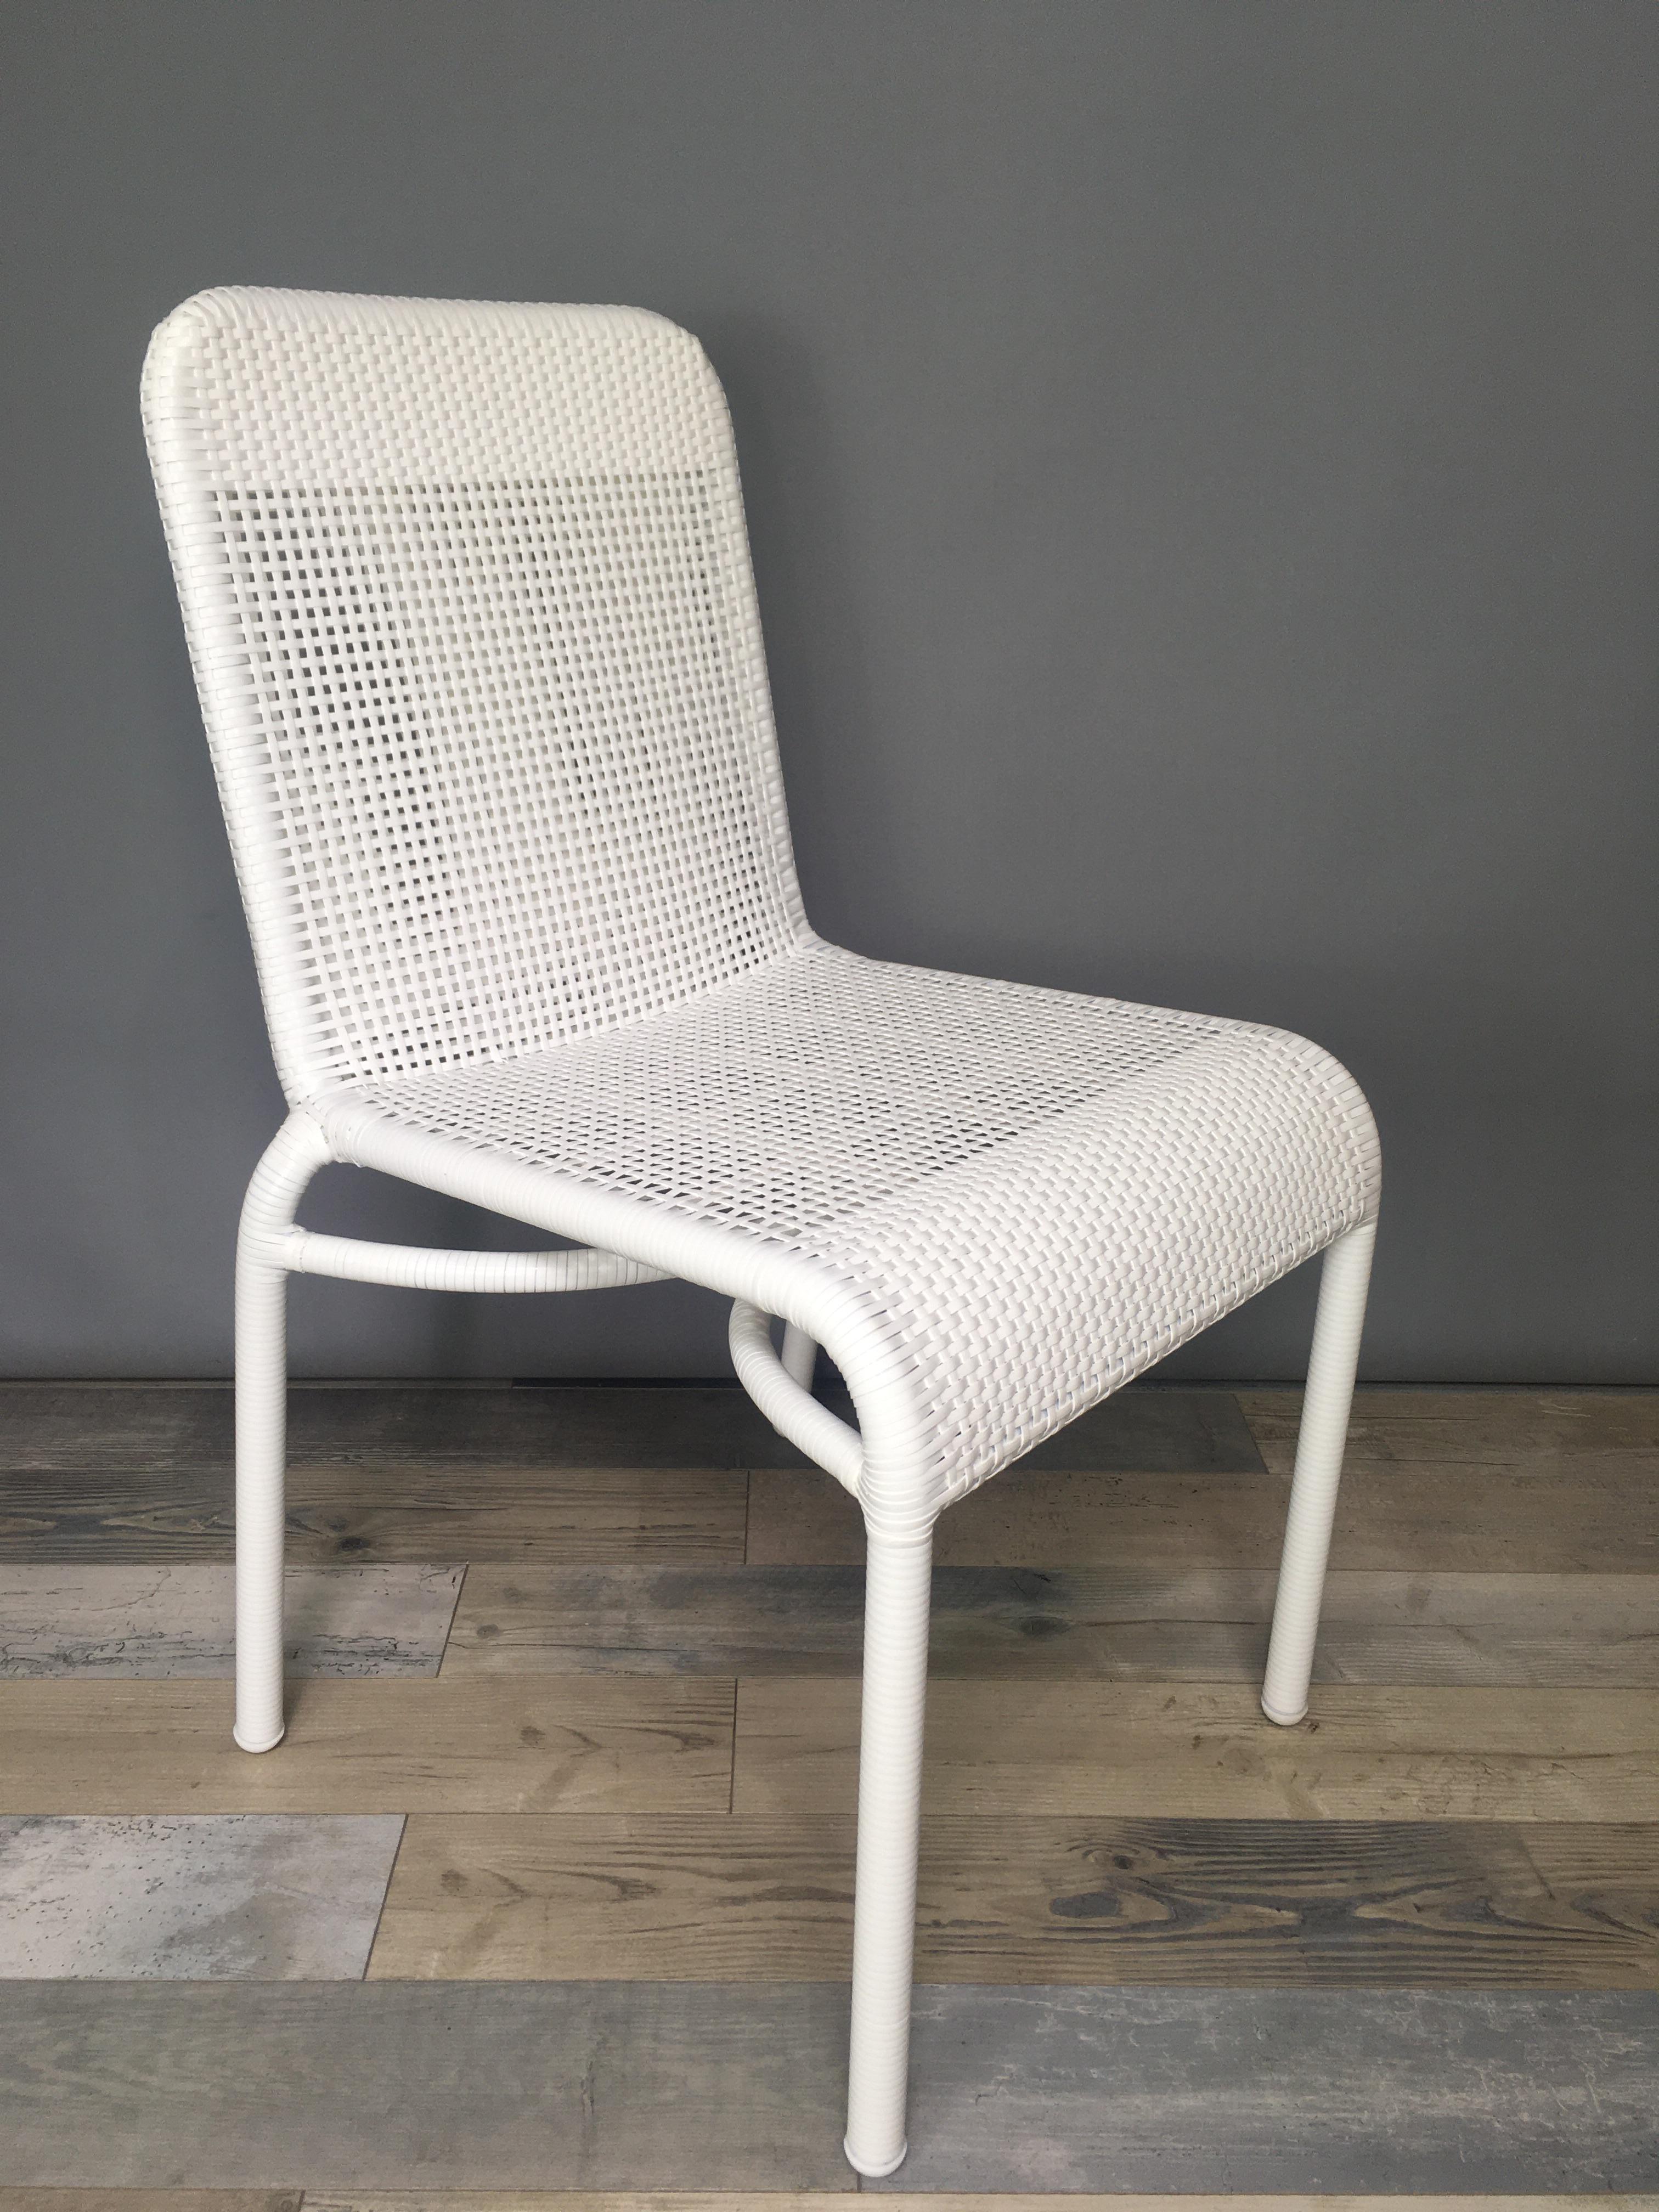 Contemporary French Modern Design White Braided Resin Outdoor Chair